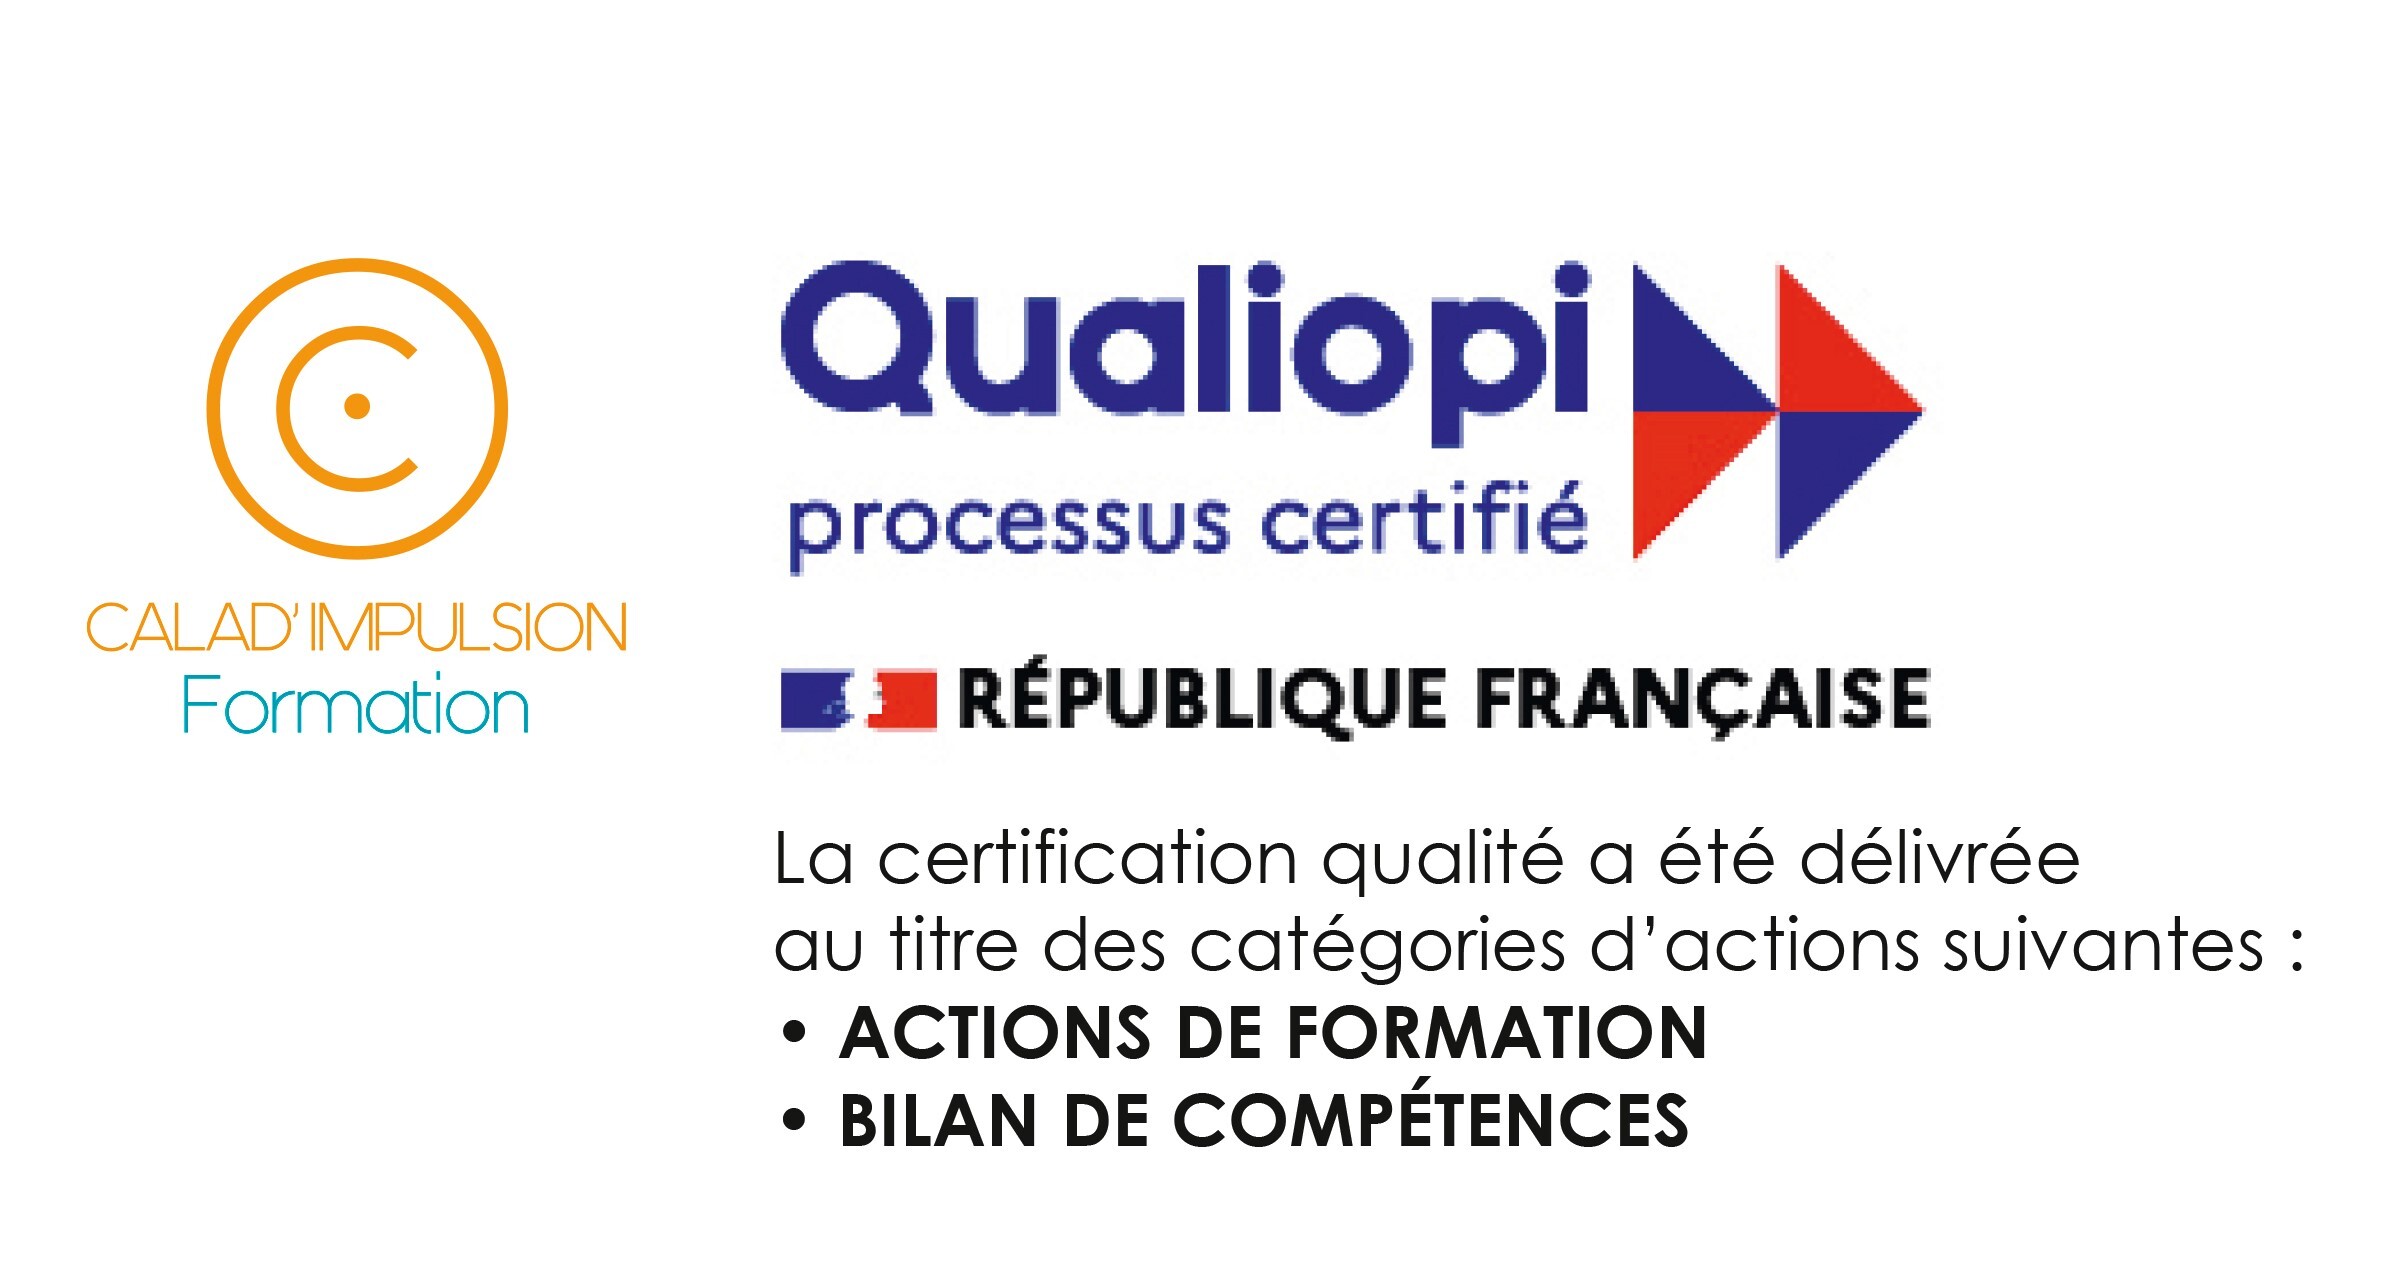 Certified by Qualiopi